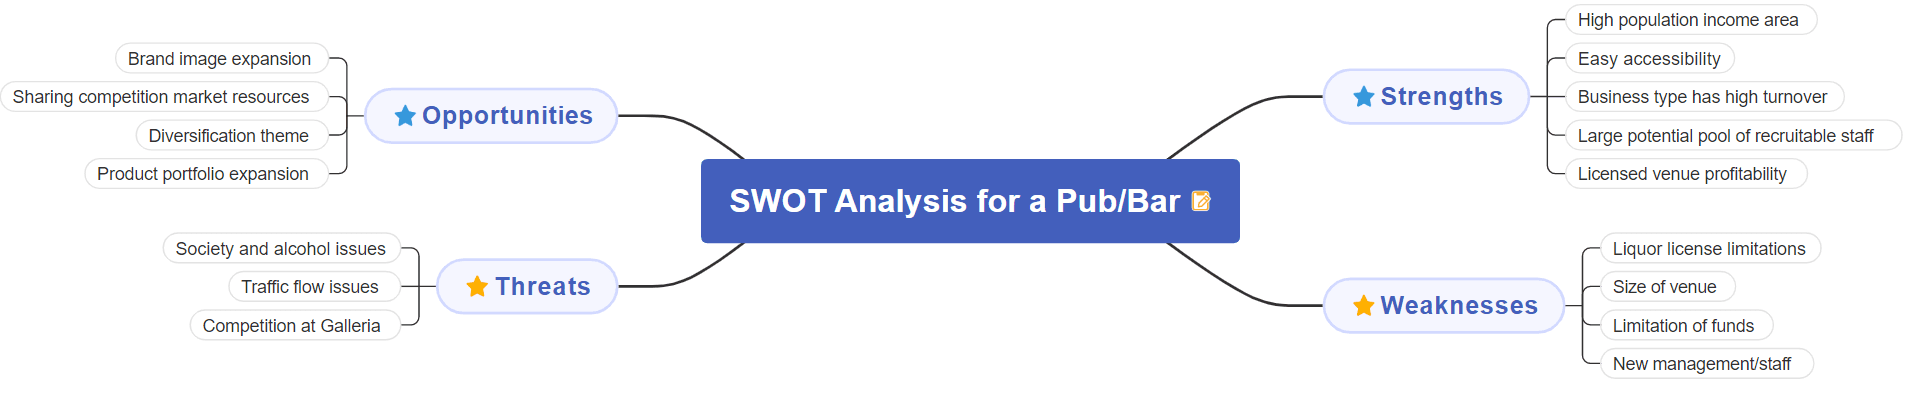 SWOT Analysis for a pub